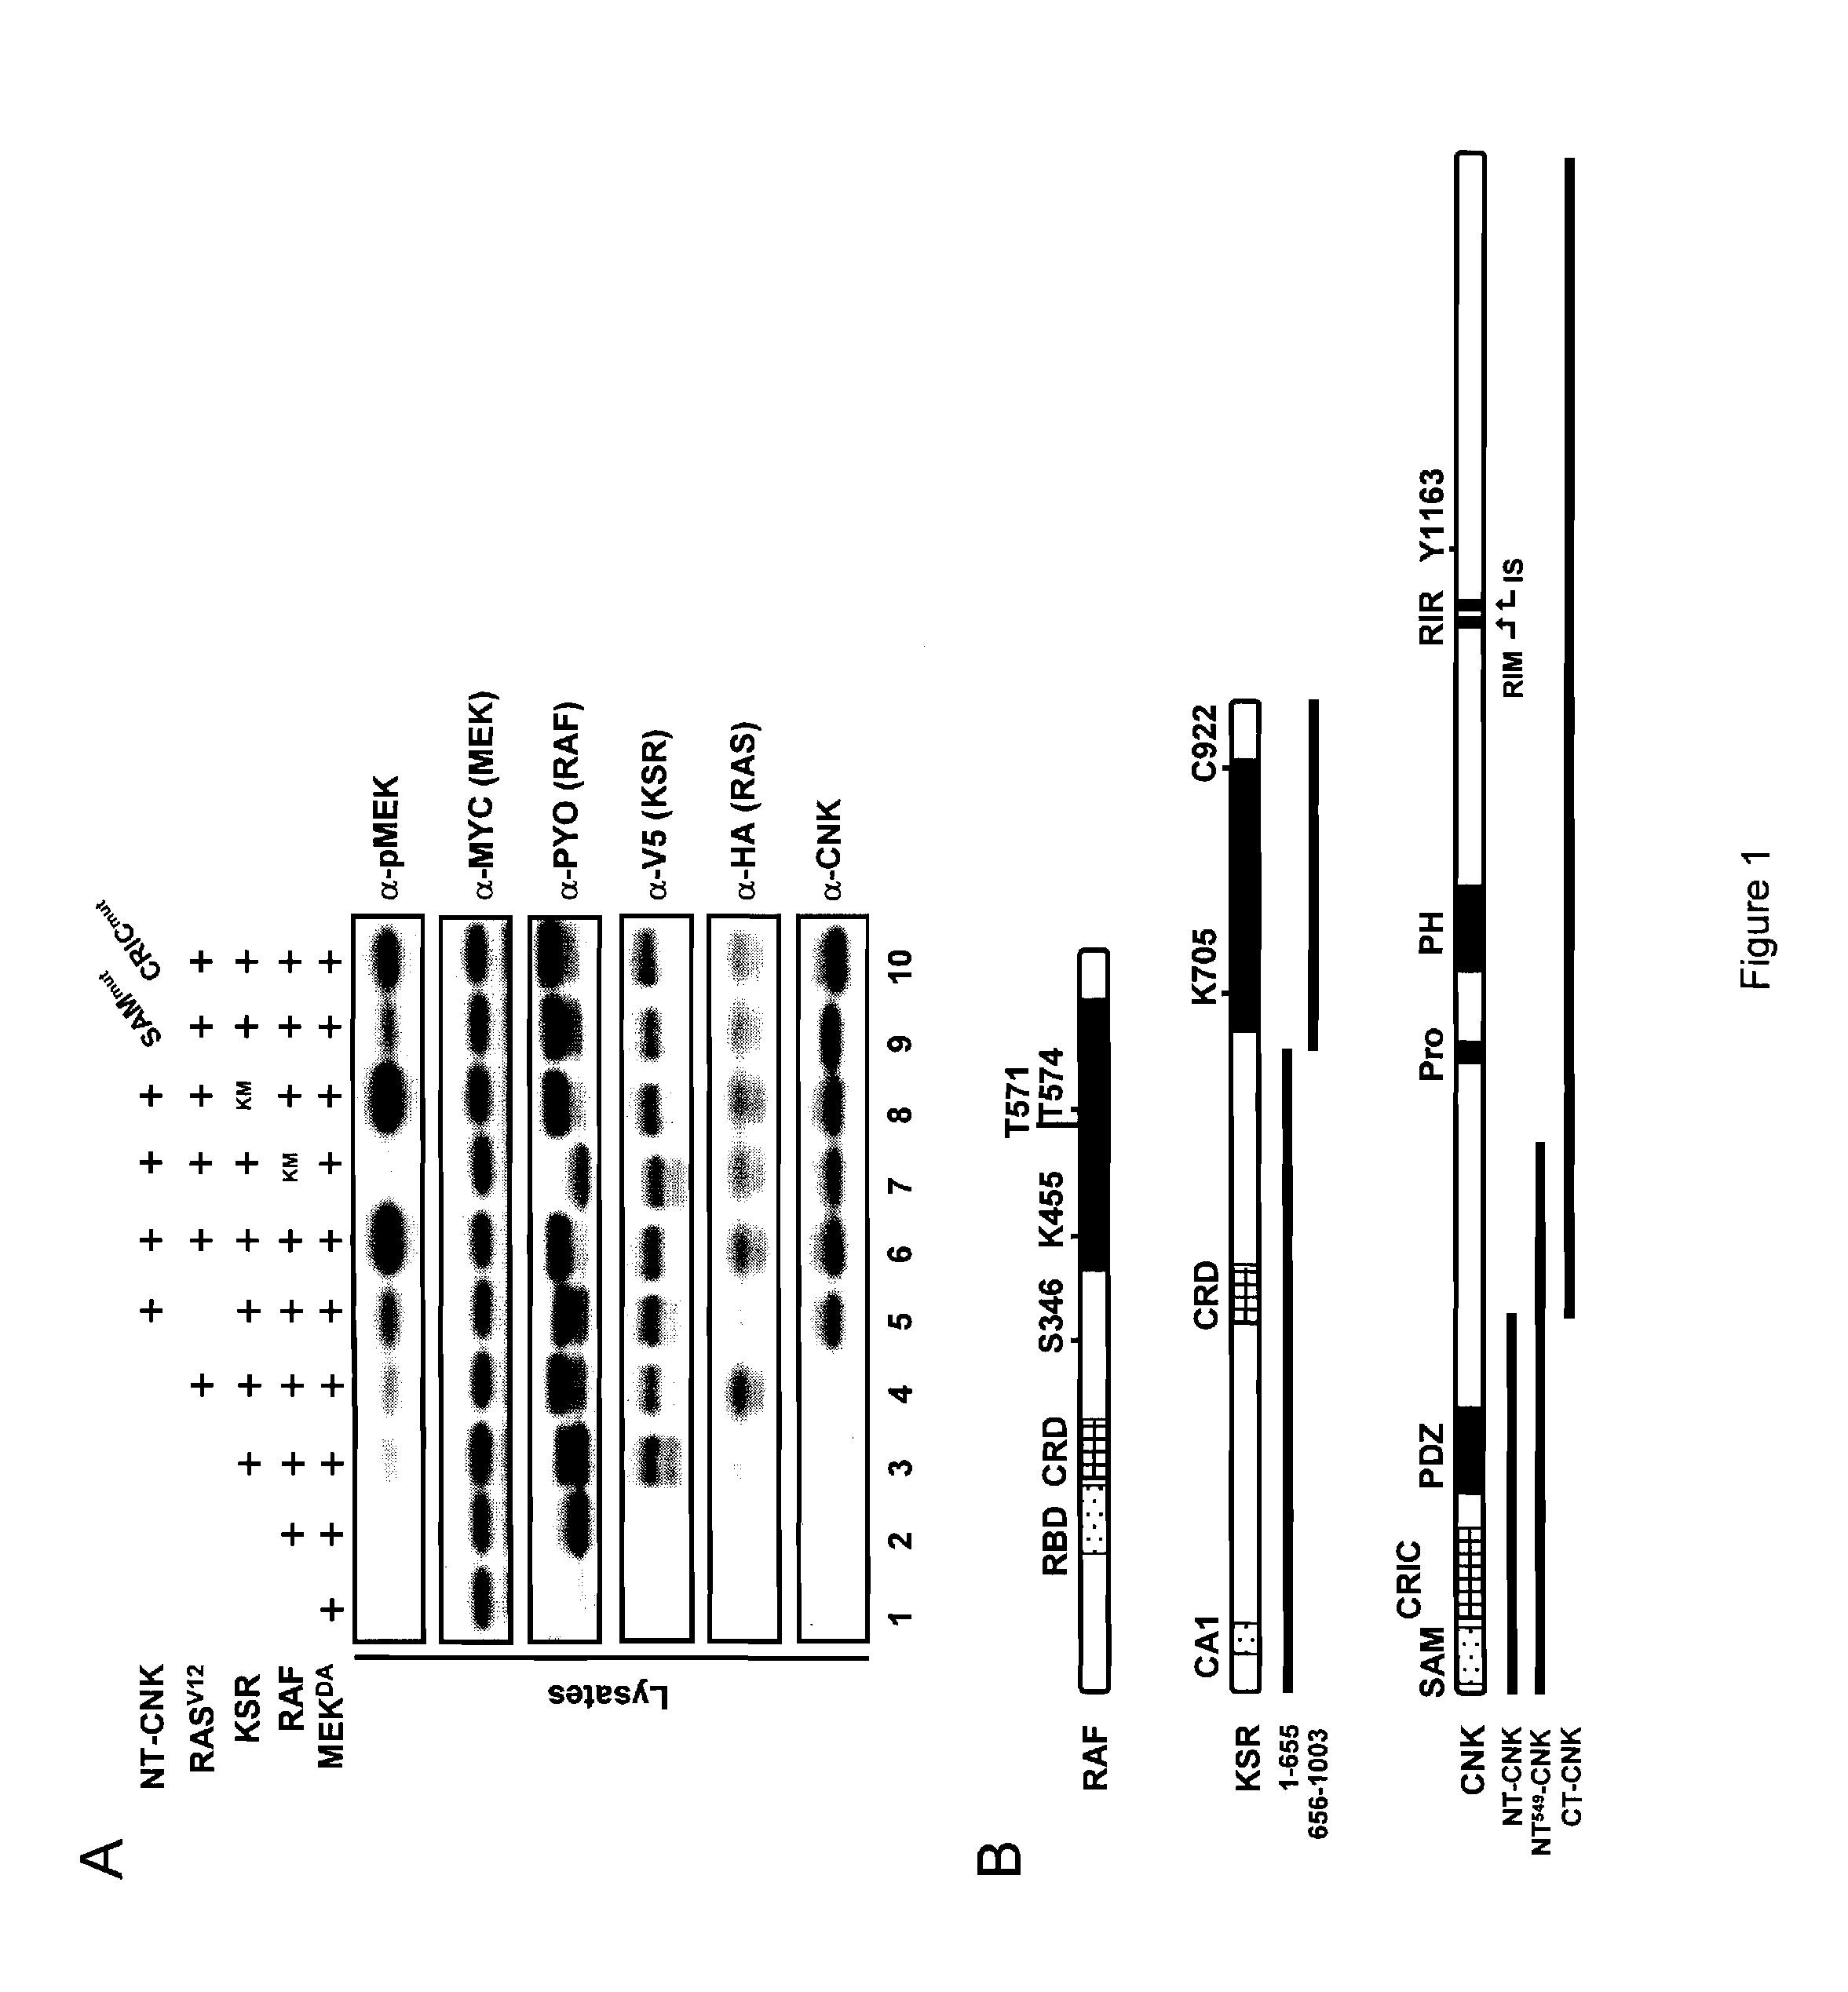 Novel protein member of the ras/mapk pathway, antibodies thereof and methods and kits of using same